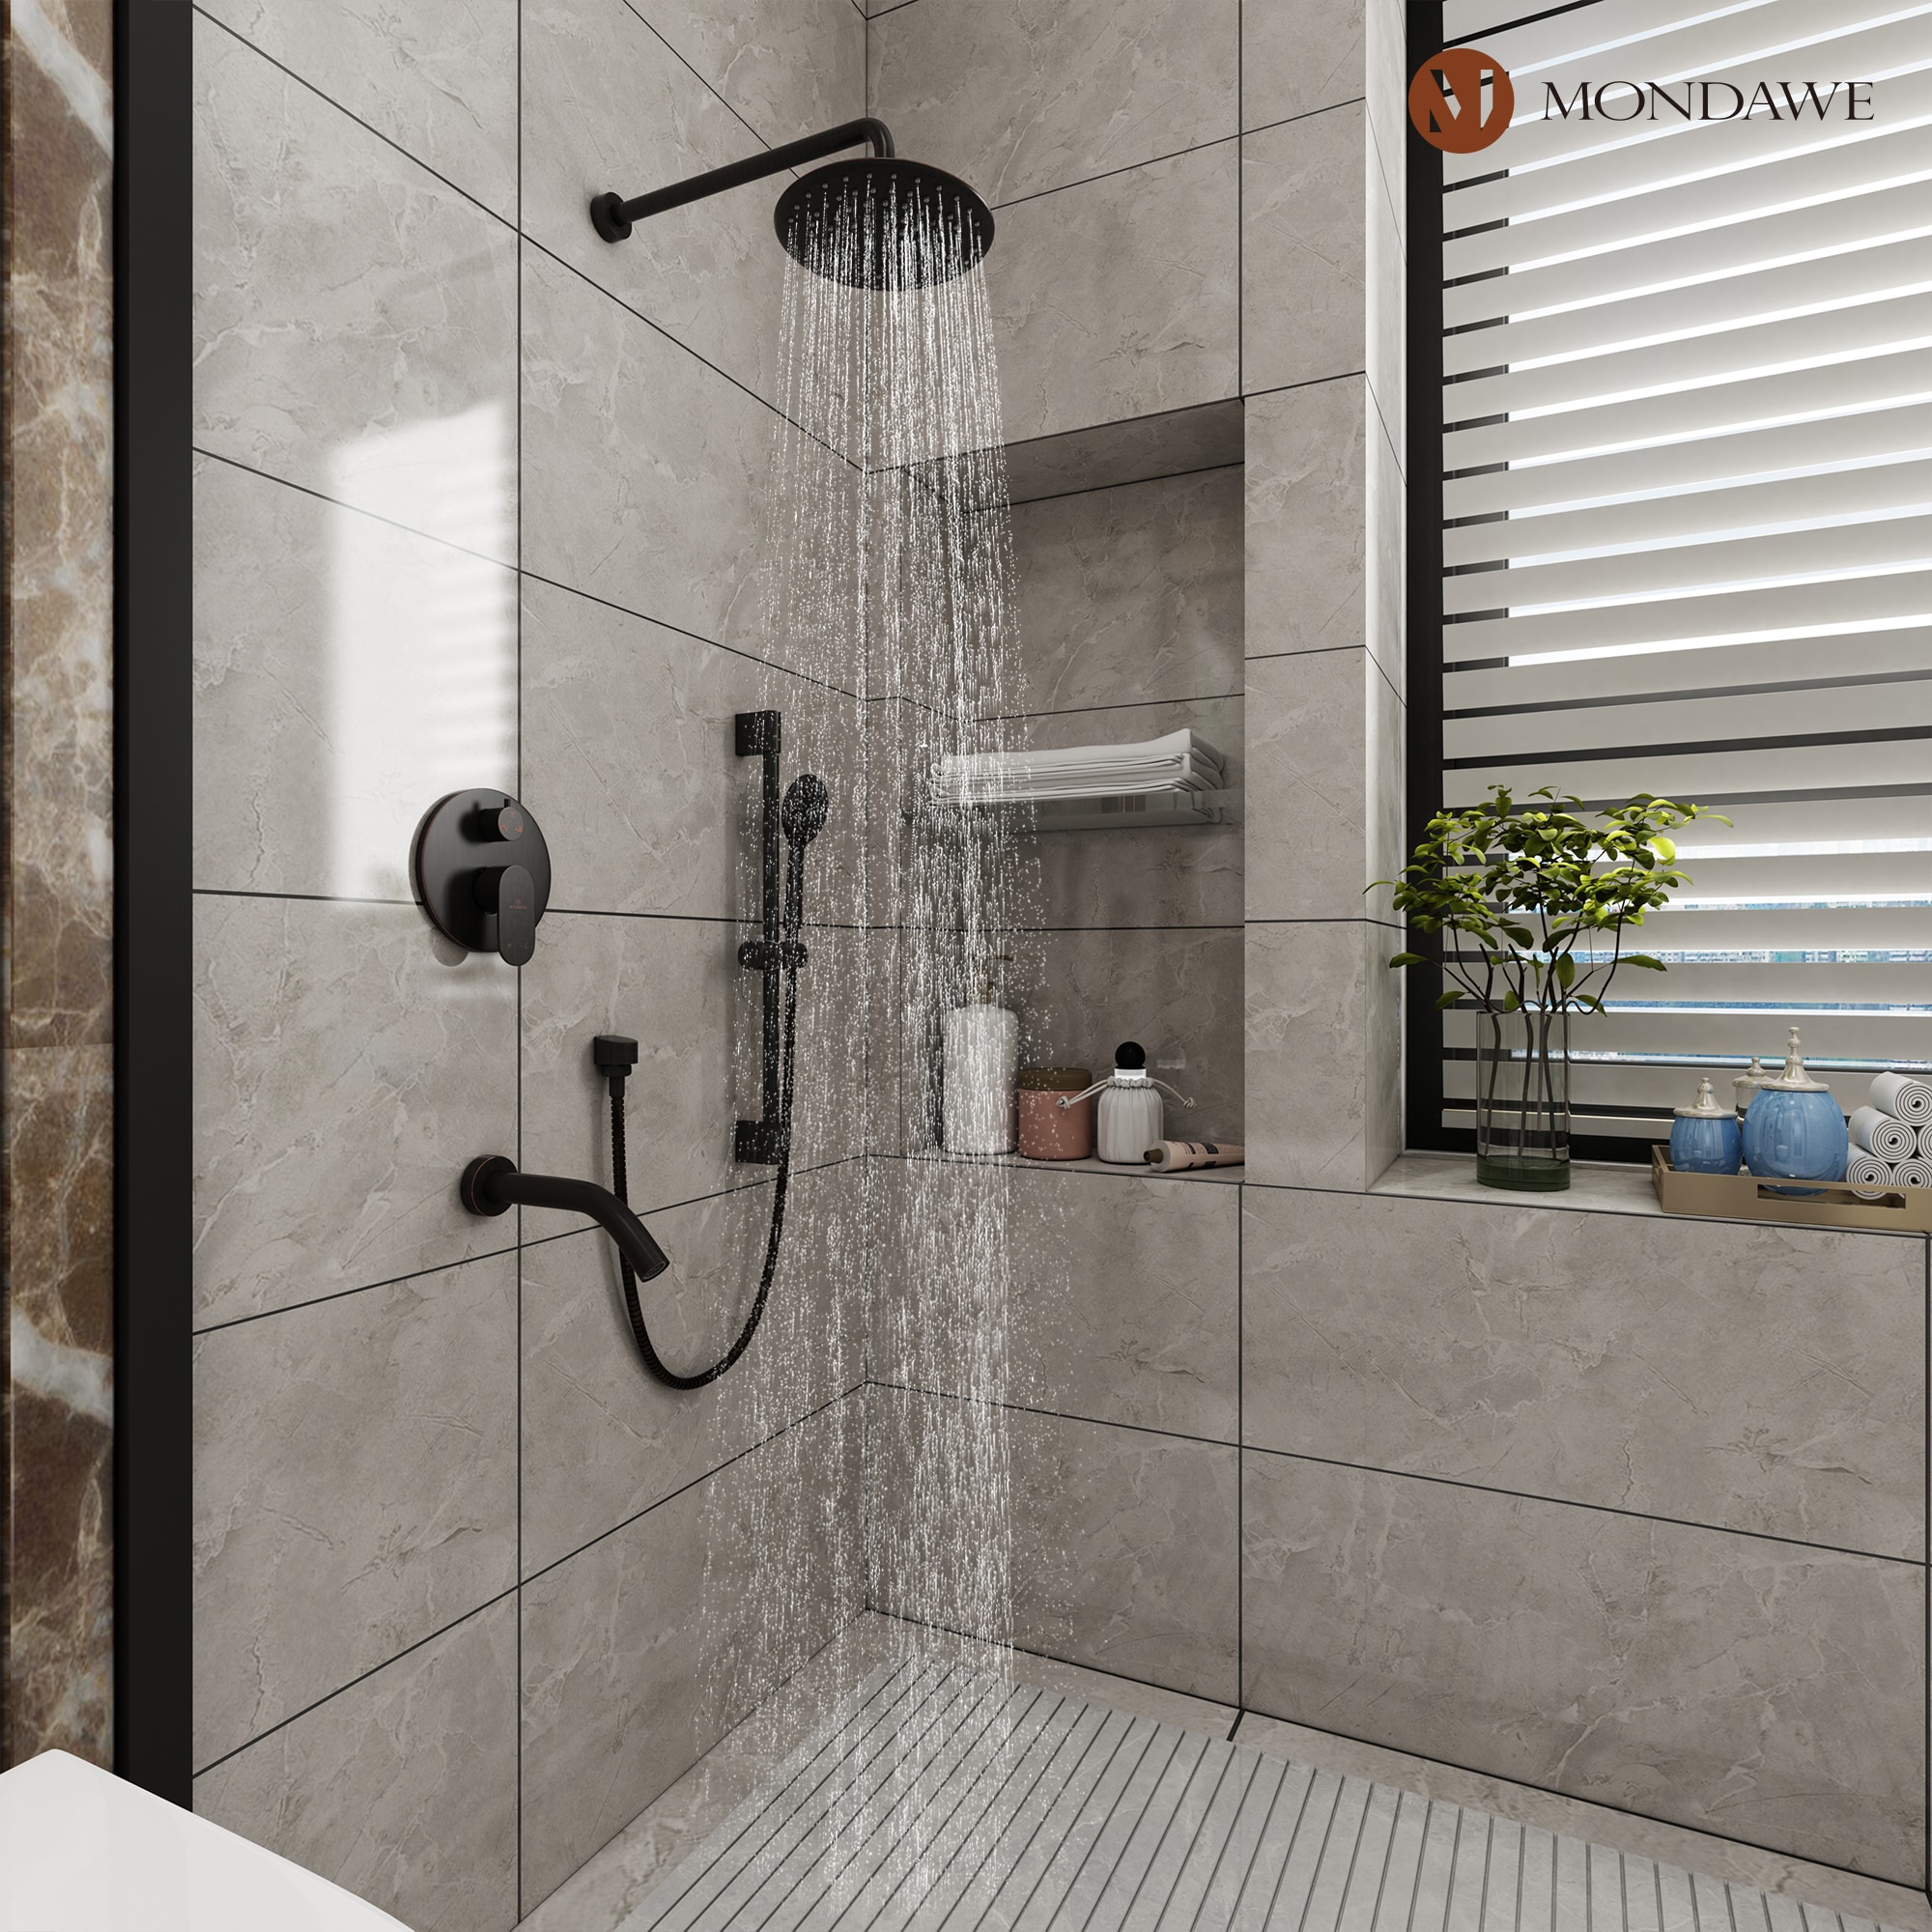 Mondawe Oil-Rubbed Bronze Built-In Shower Faucet System with 3